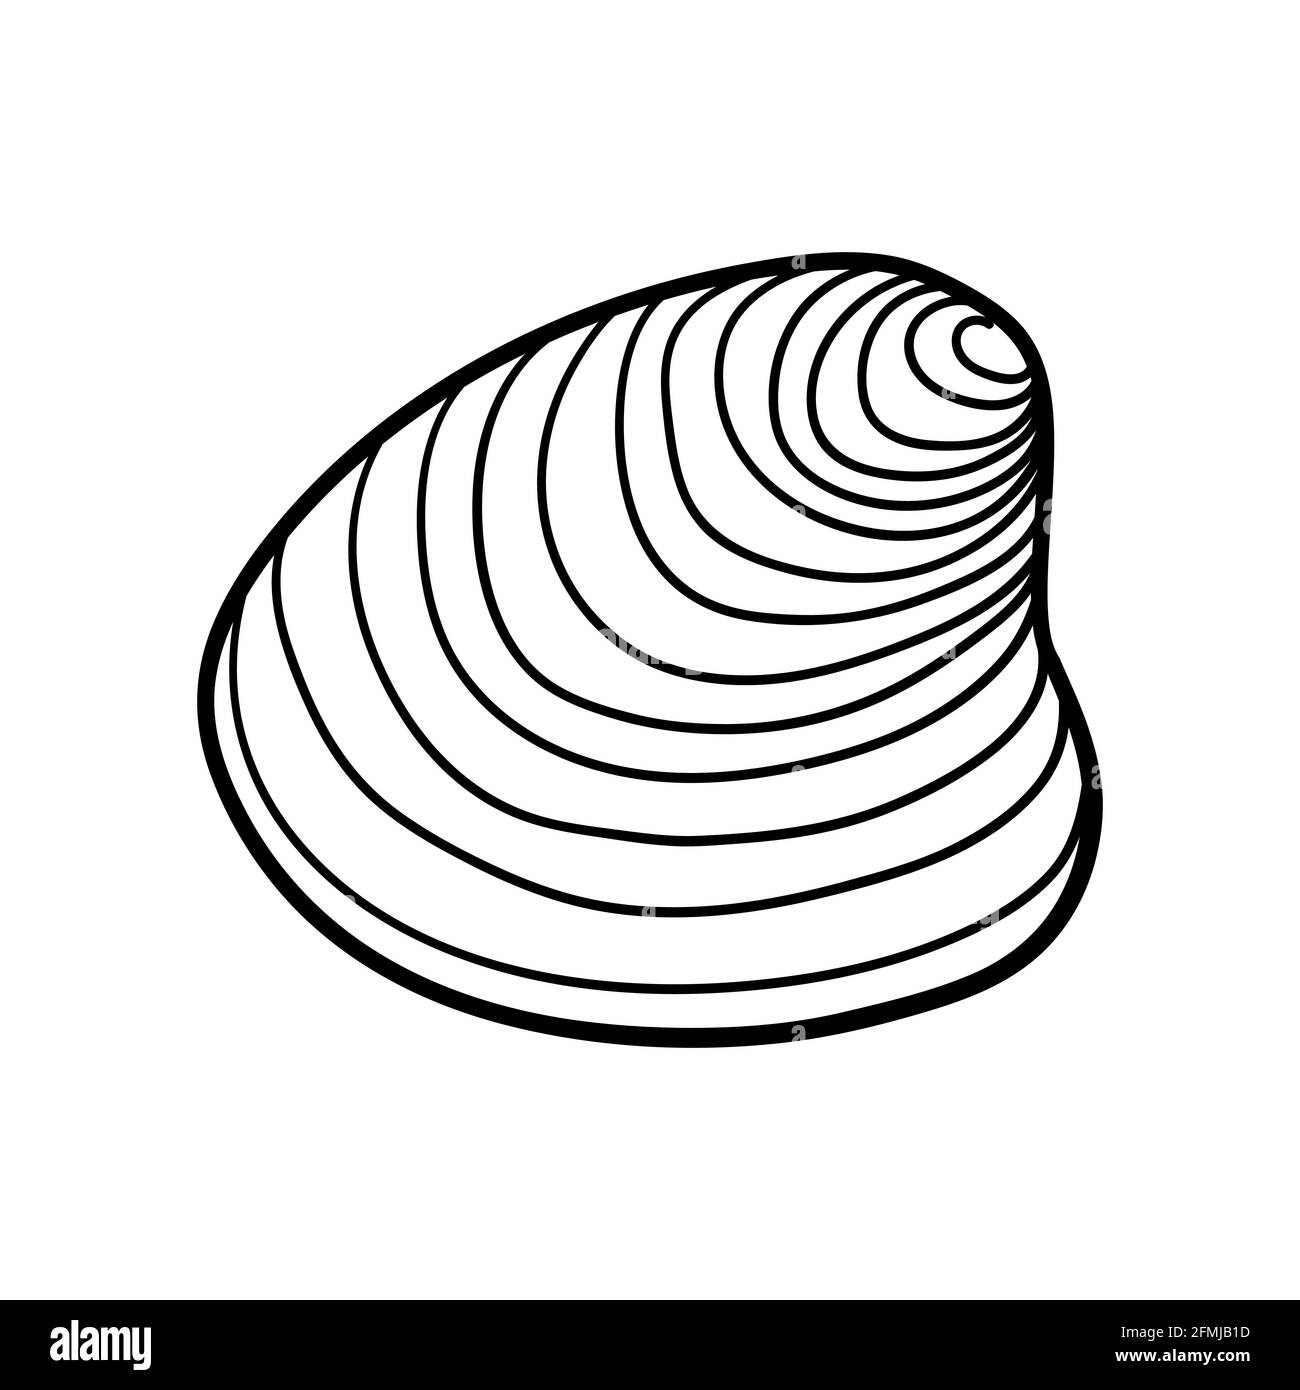 Hand-drawn clam shell of engraved line. Design element for invitations, greeting cards, posters, banners, flyers and more.Vector illustration isolated Stock Vector